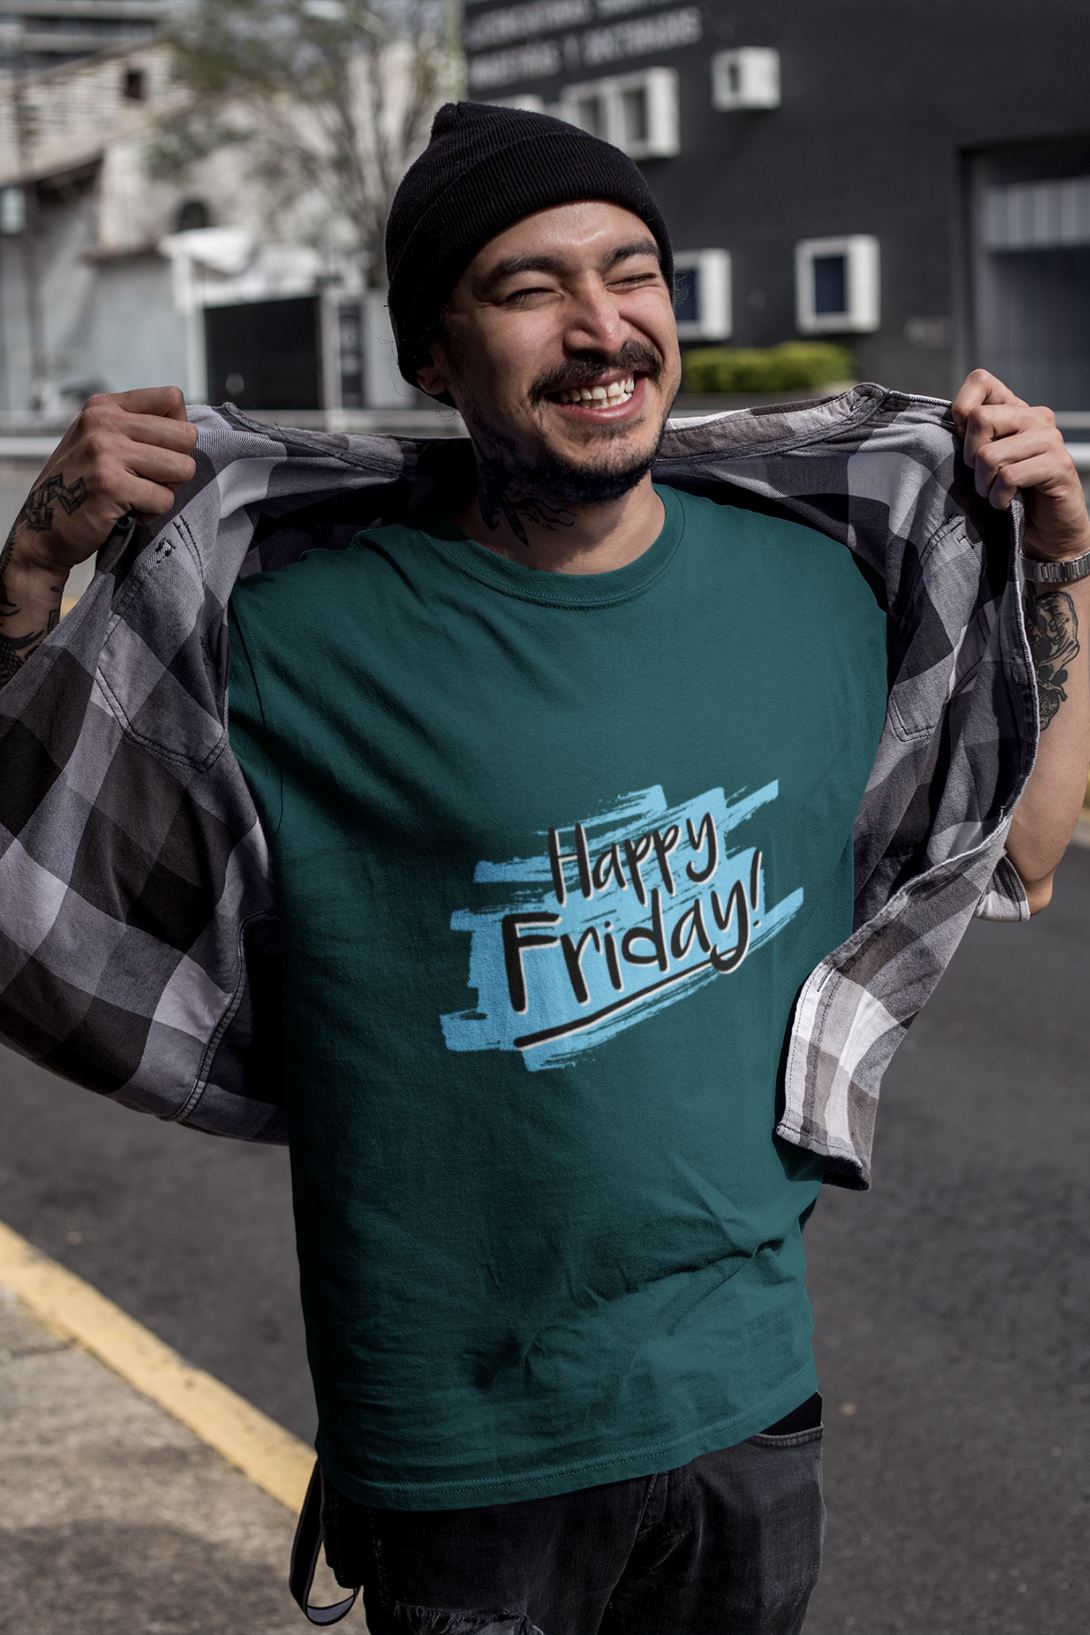 Happy Friday Printed T-Shirt For Men - WowWaves - 3